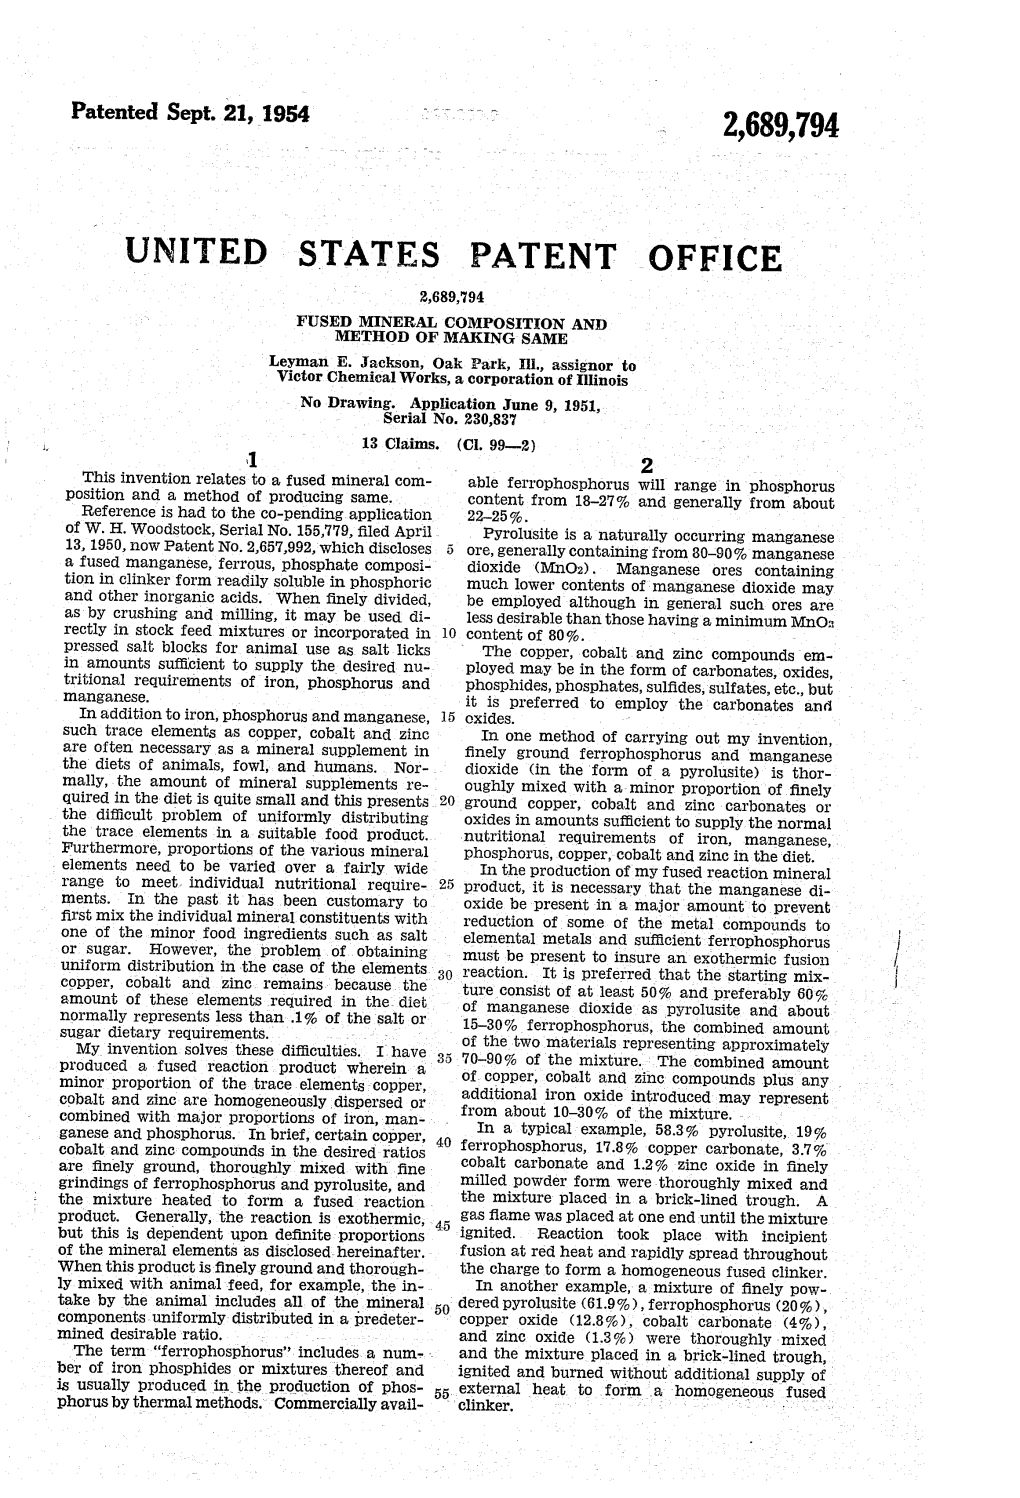 UNITED STATES PATENT OFFICE 2,689,794 FUSED MINERAL COMPOSITION and METHOD of MAKING SAME Leyman E